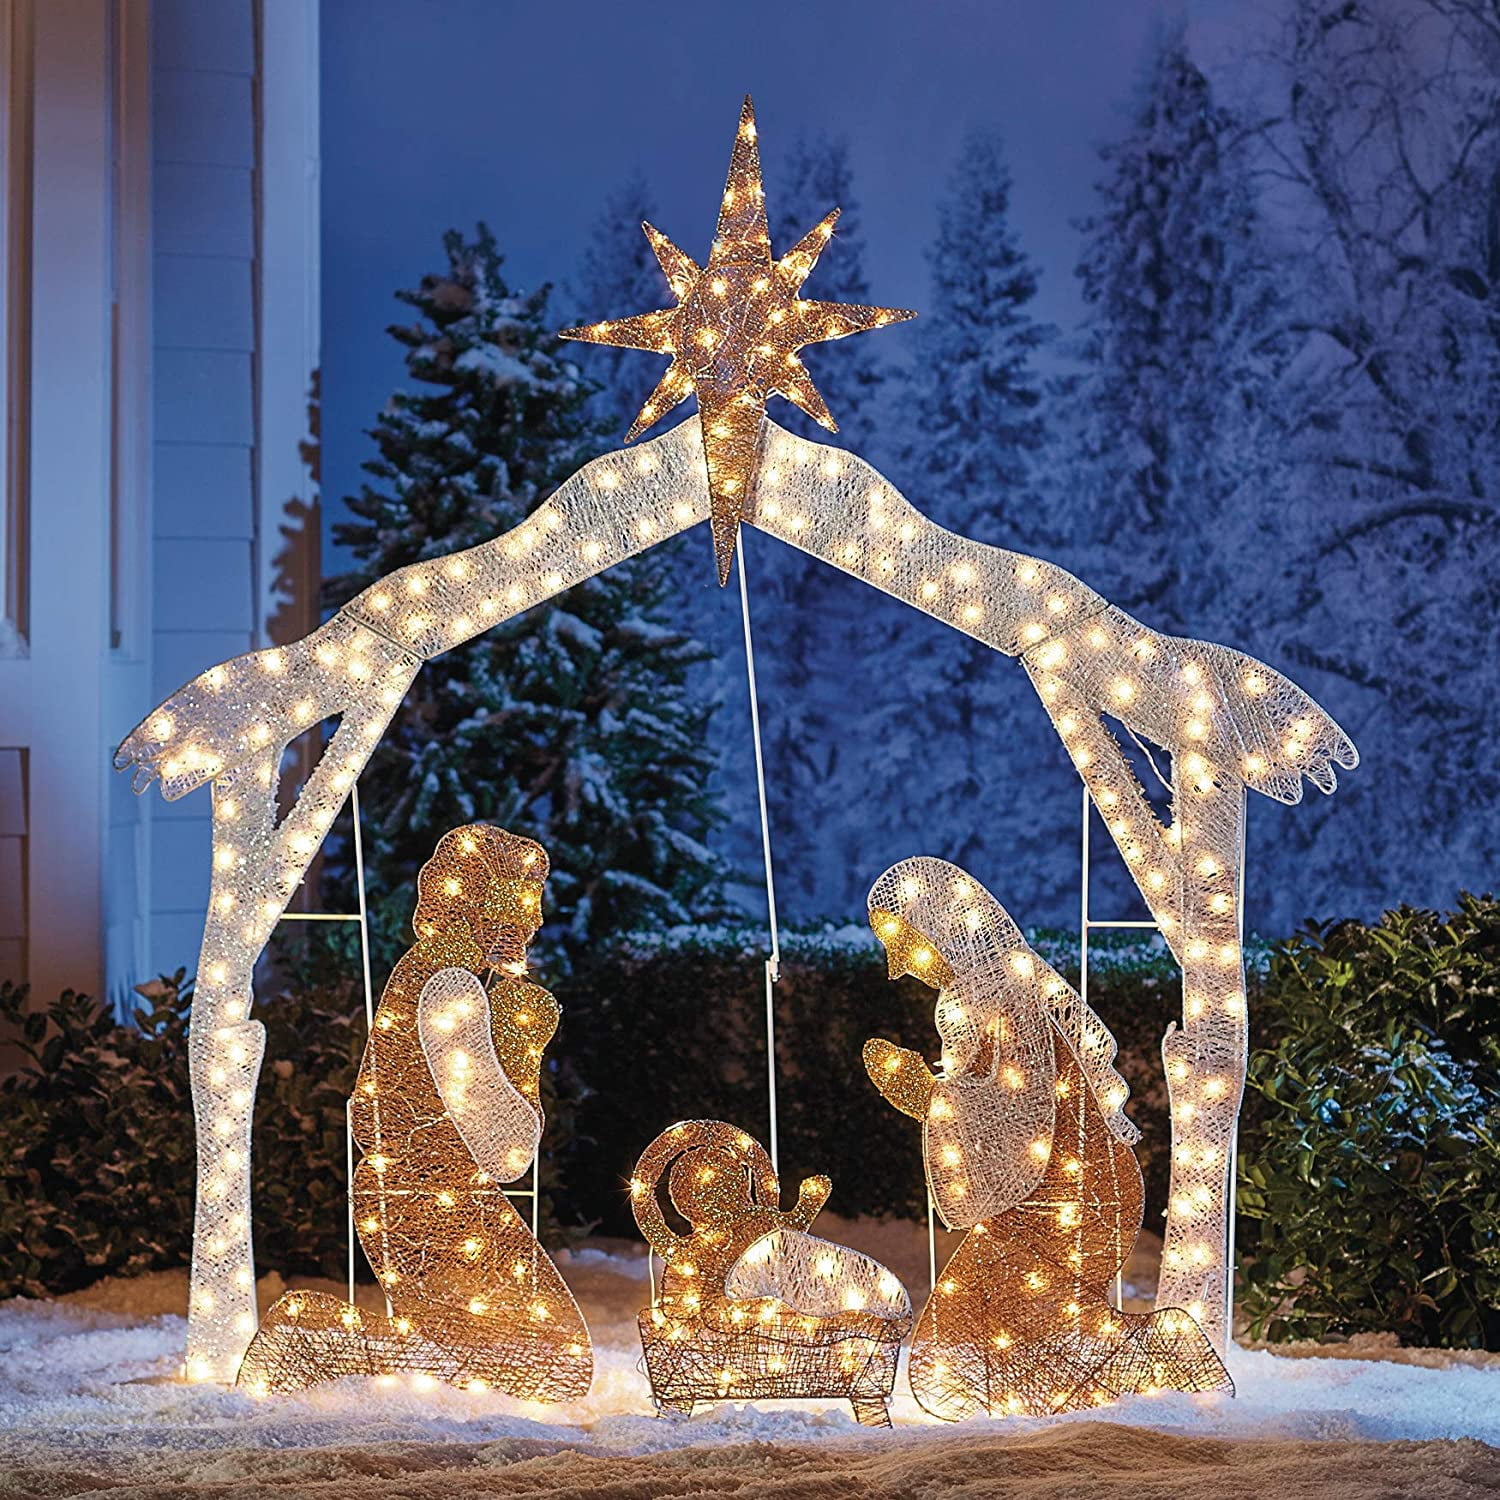 Light-Up Nativity Scene Christmas Outdoor Decoration with LED ...